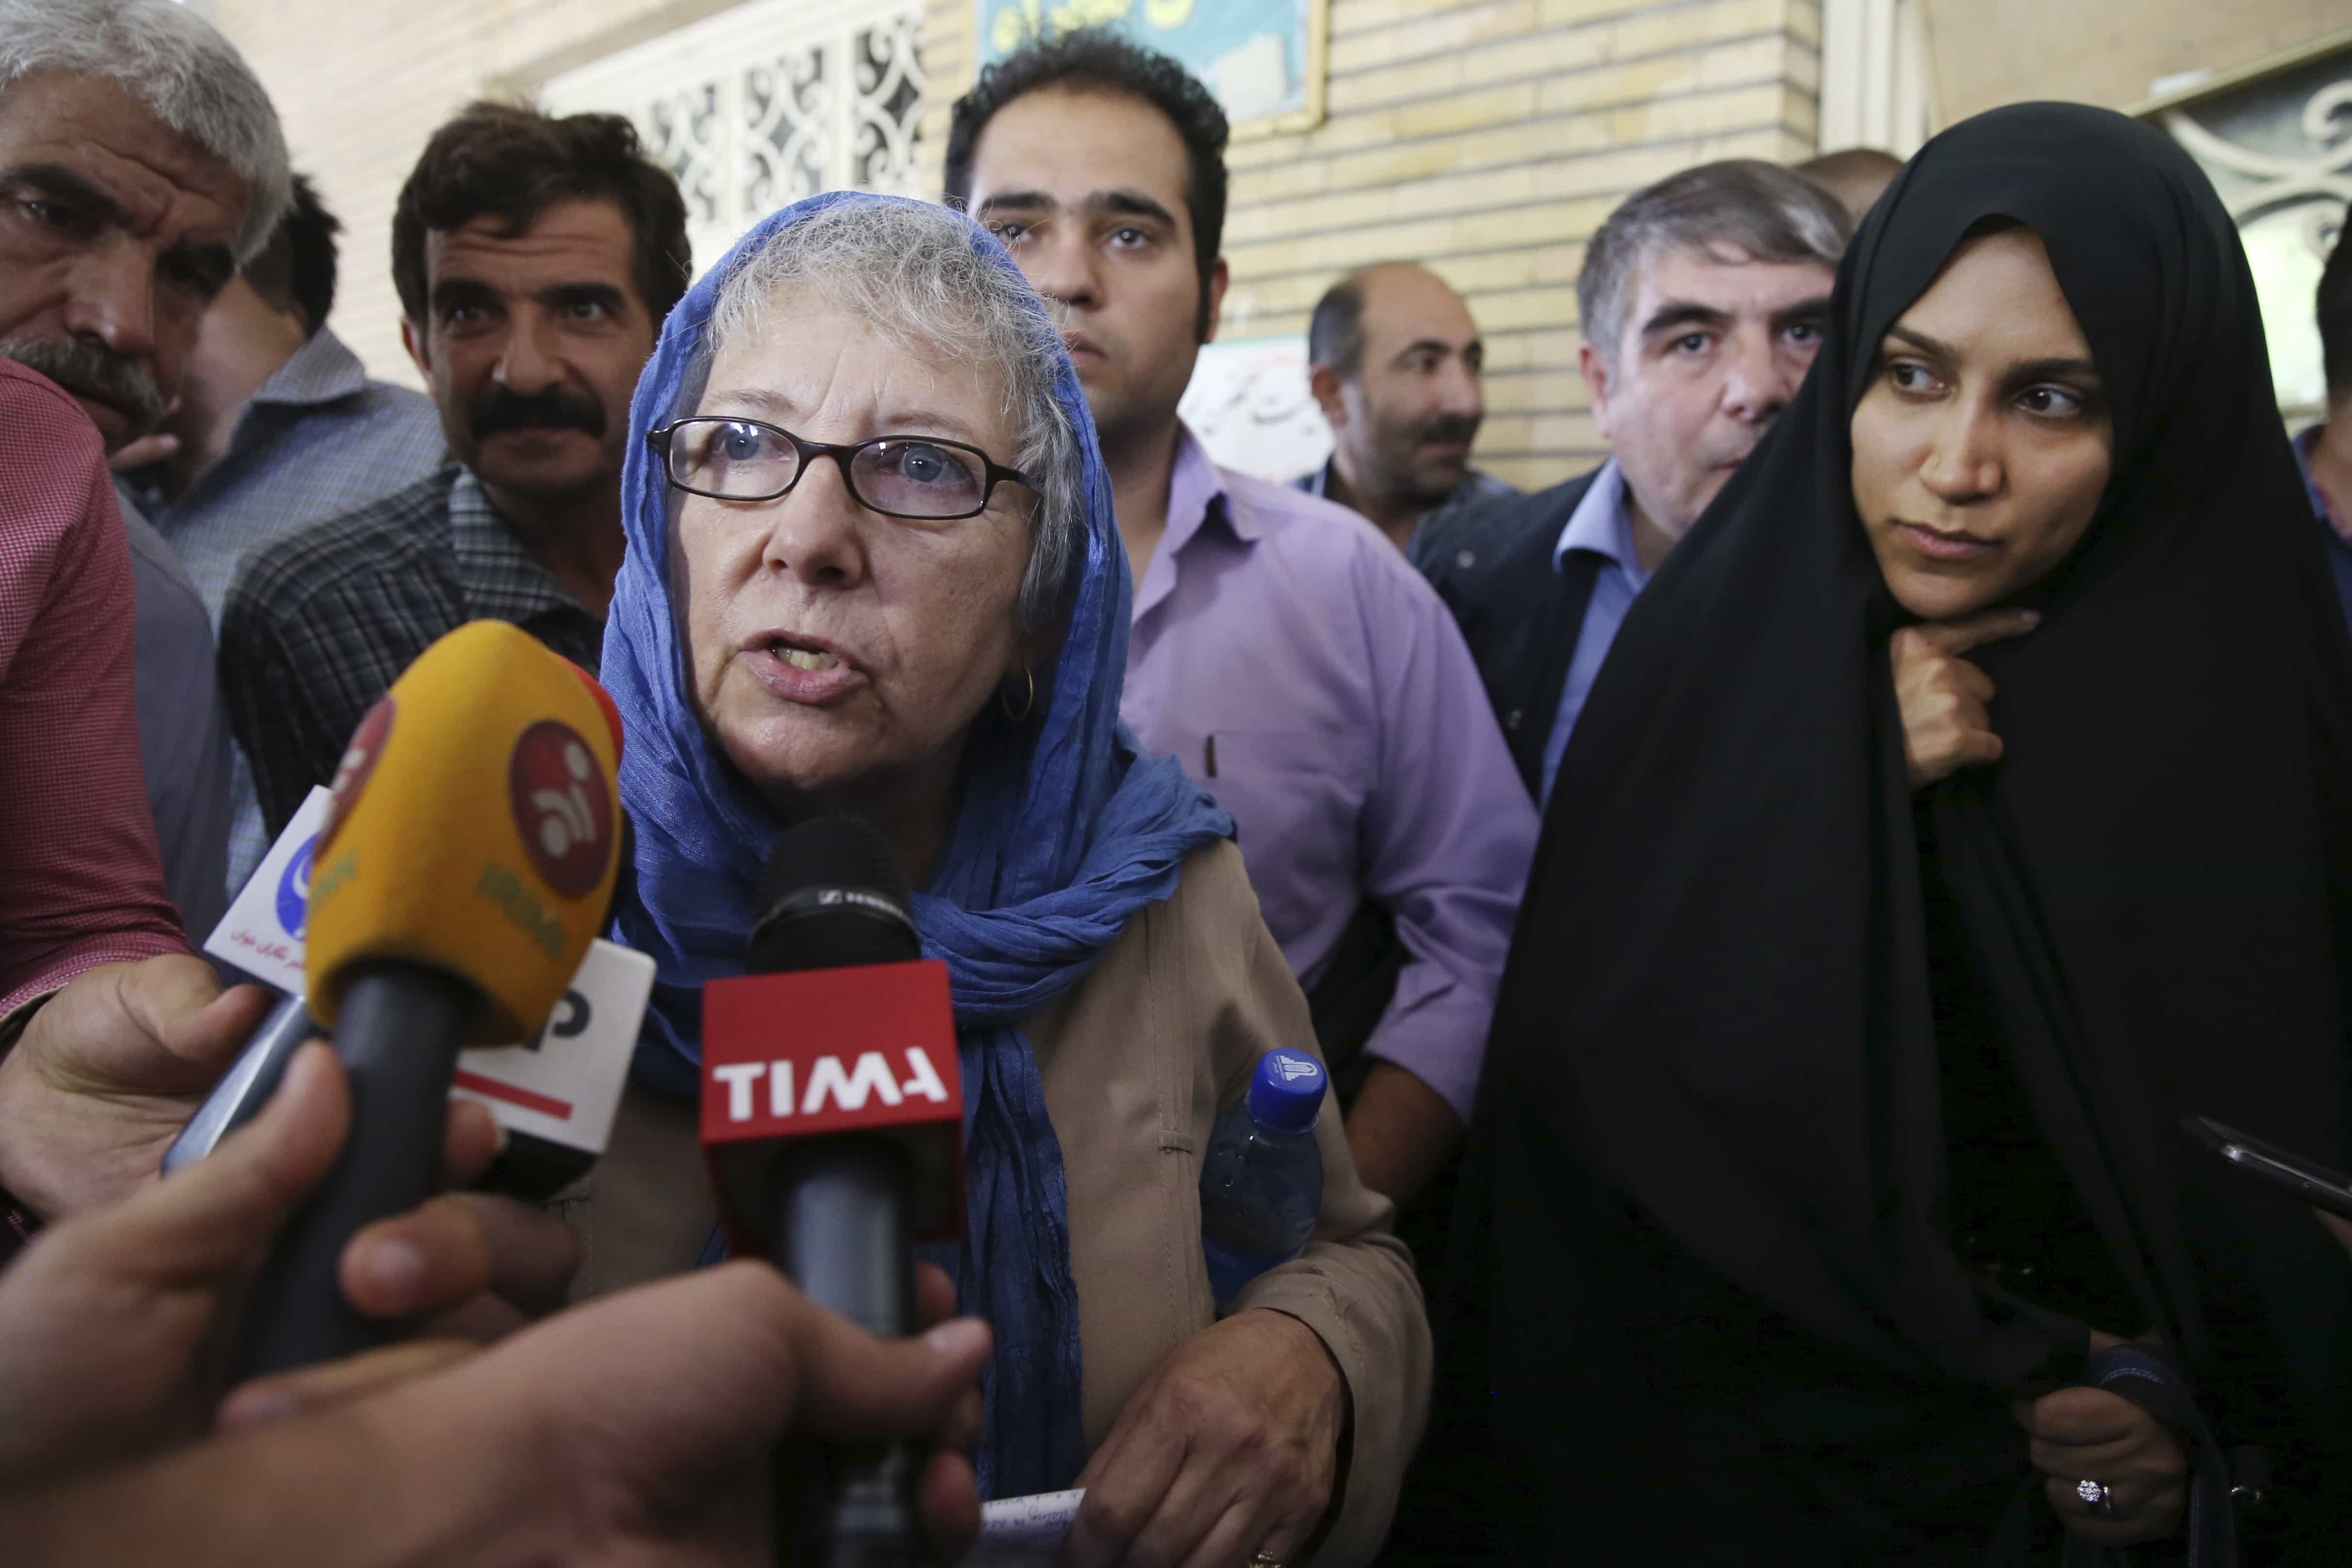 Mary Rezaian, mother of detained Washington Post correspondent Jason Rezaian, speaks with media as she leaves a Revolutionary Court building in Tehran on 10 August 2015, AP Photo/Vahid Salemi